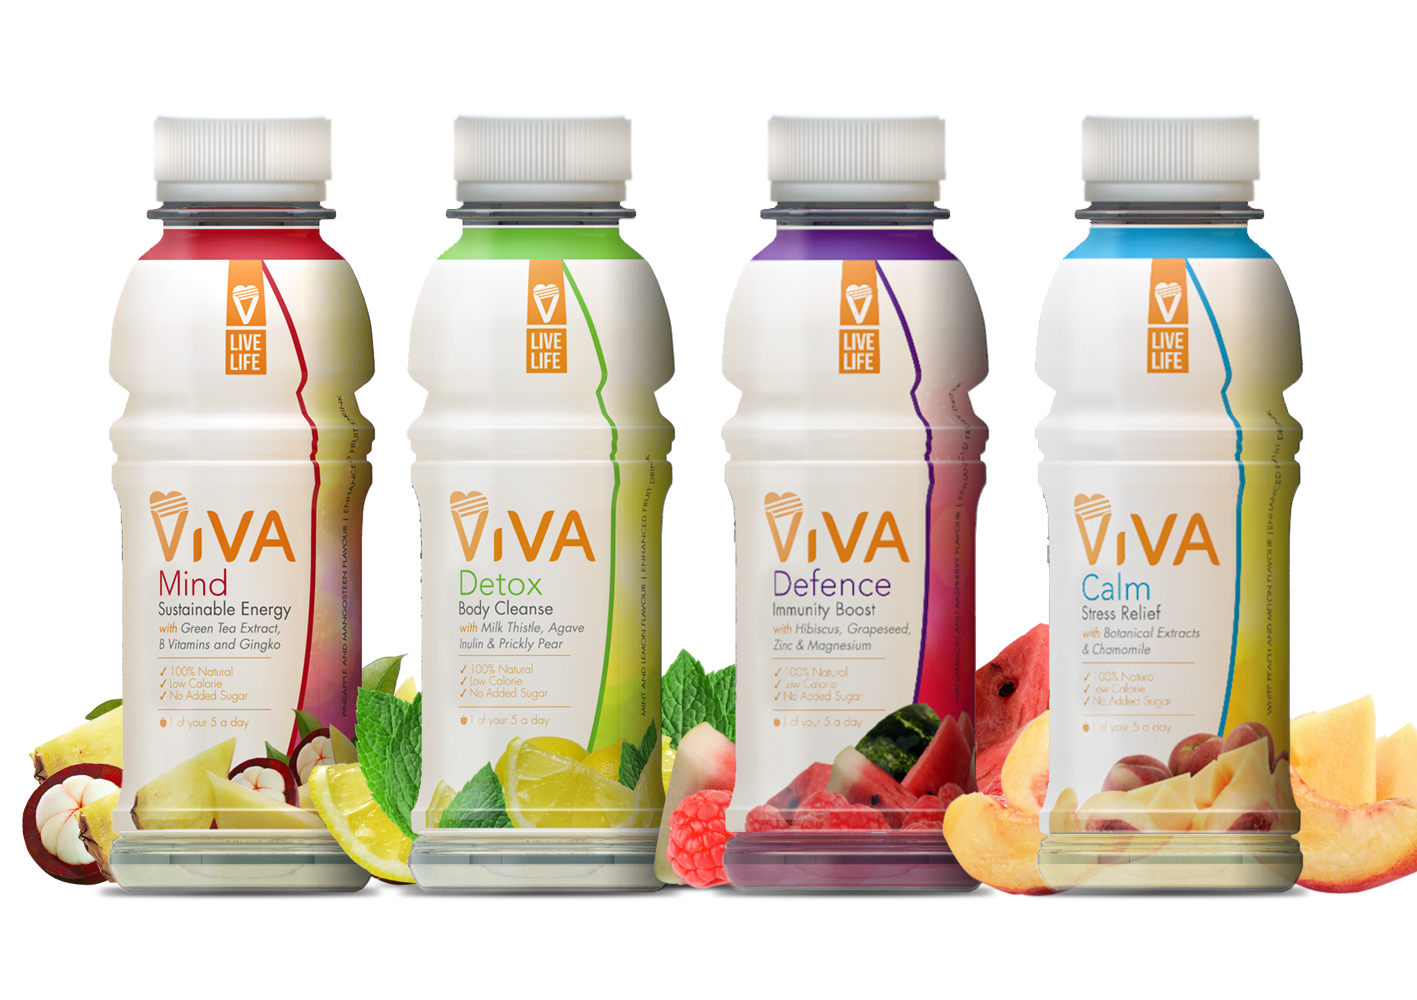 "Functional health drinks are the future" says ViVa Drinks